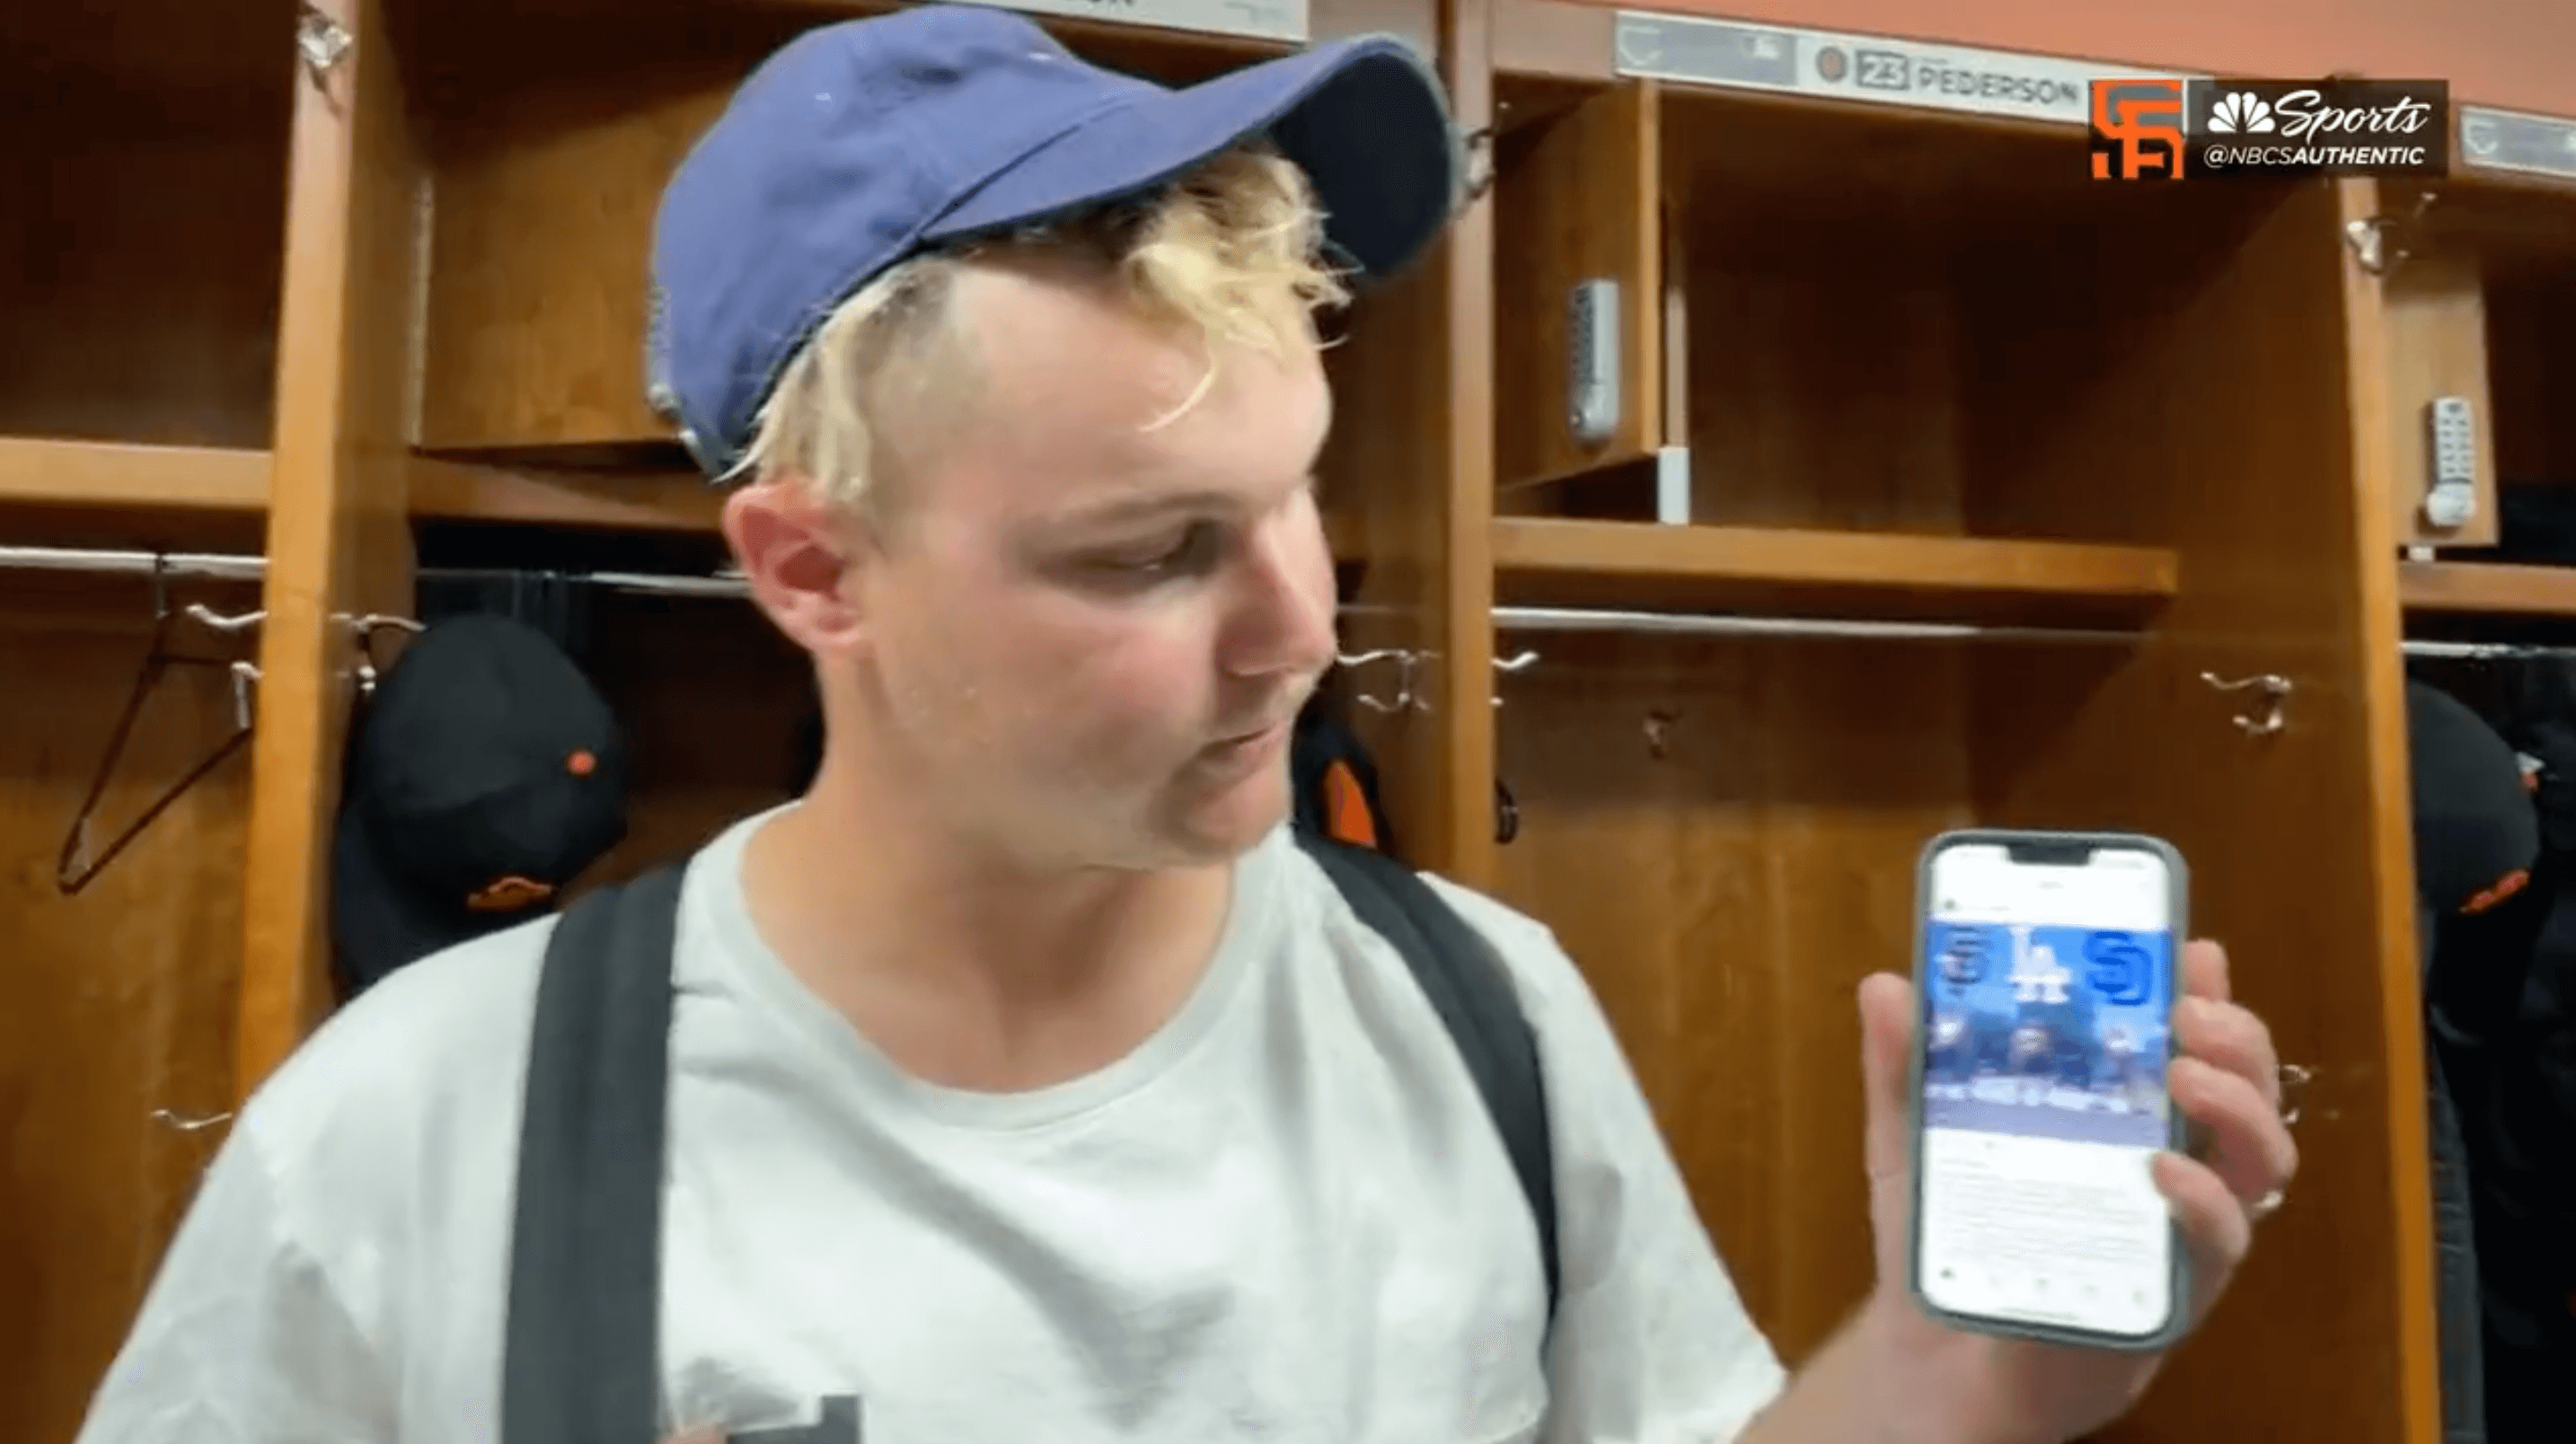 Joc Pederson sending his pearl necklace to Baseball Hall of Fame